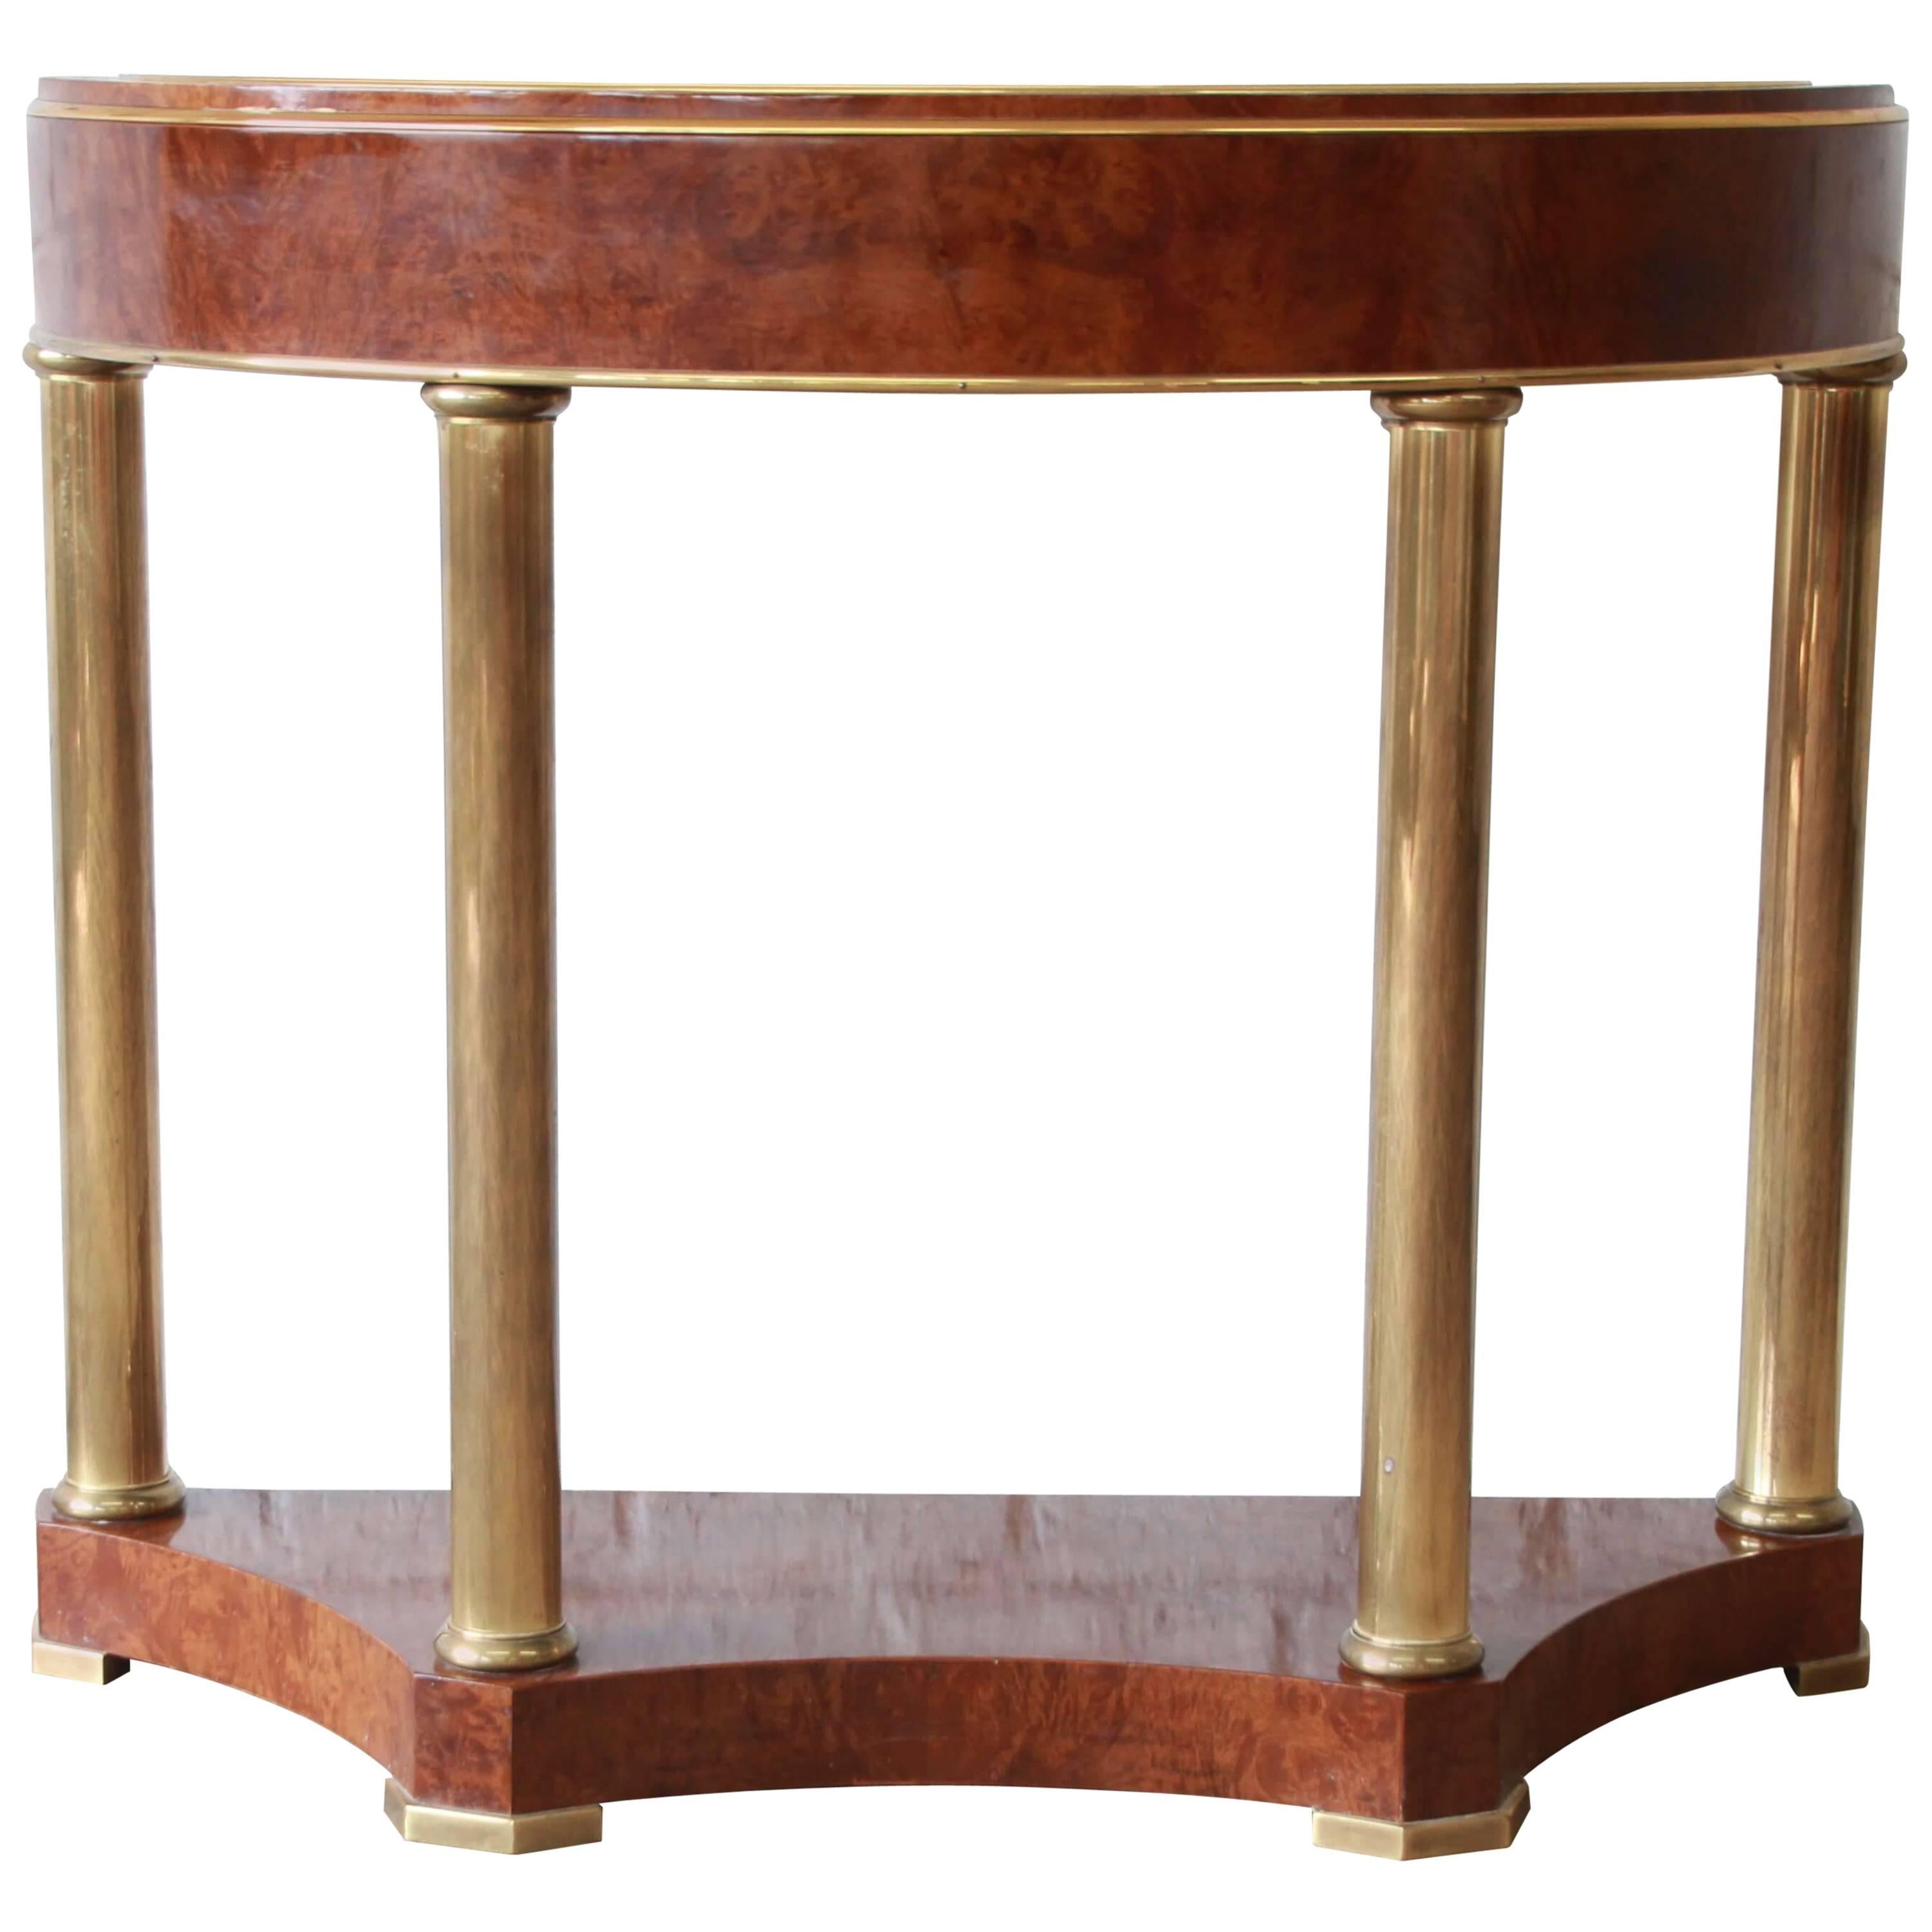 Mastercraft Burl Wood and Brass Demilune Console Table